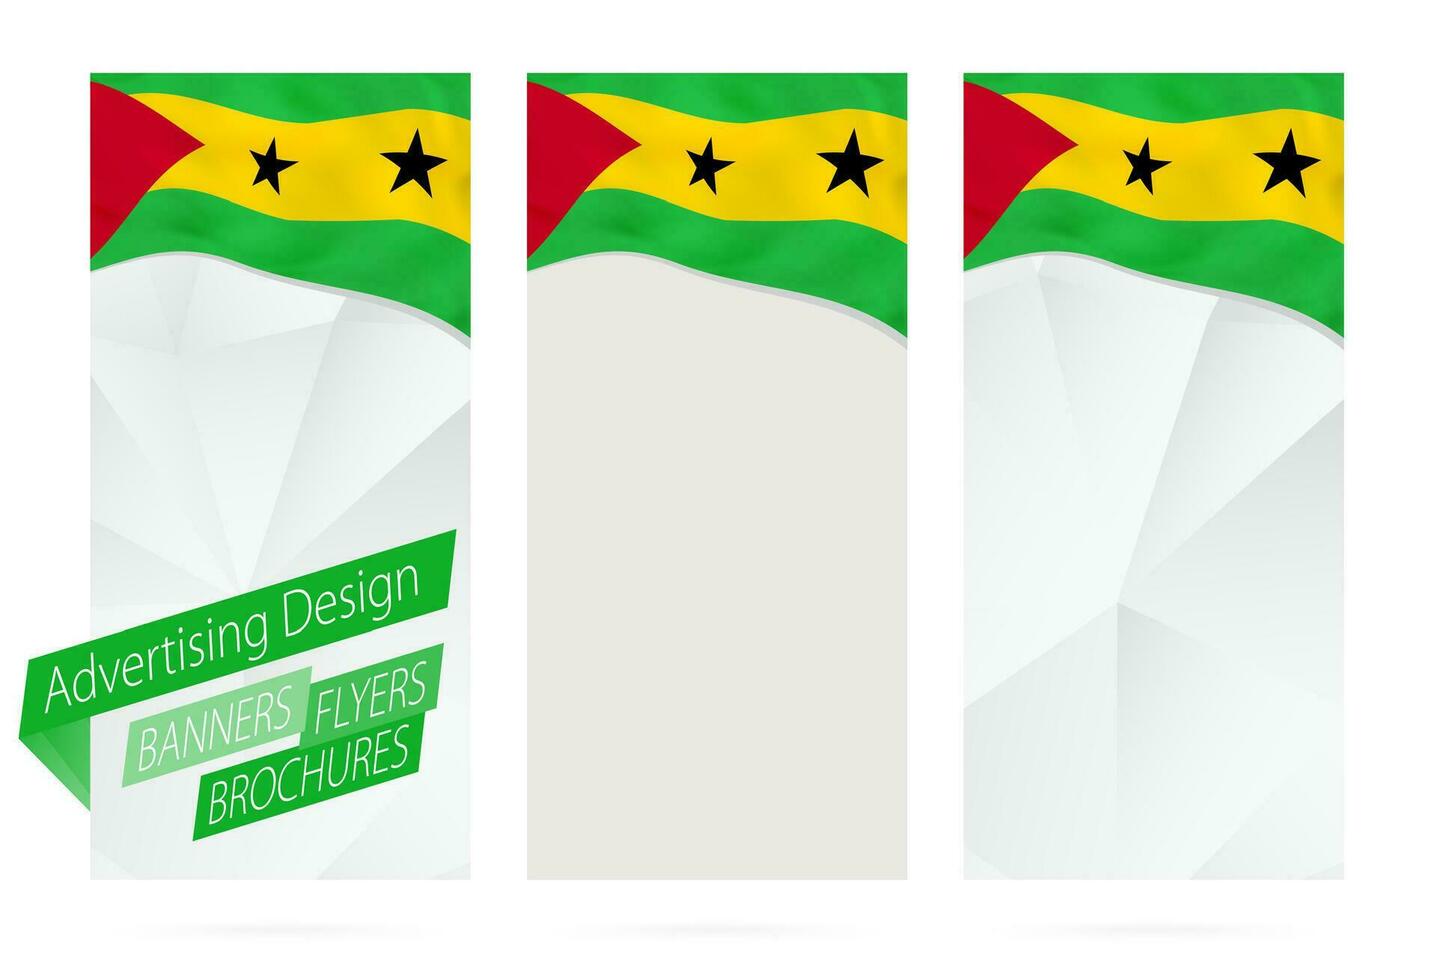 Design of banners, flyers, brochures with flag of Sao Tome and Principe. vector